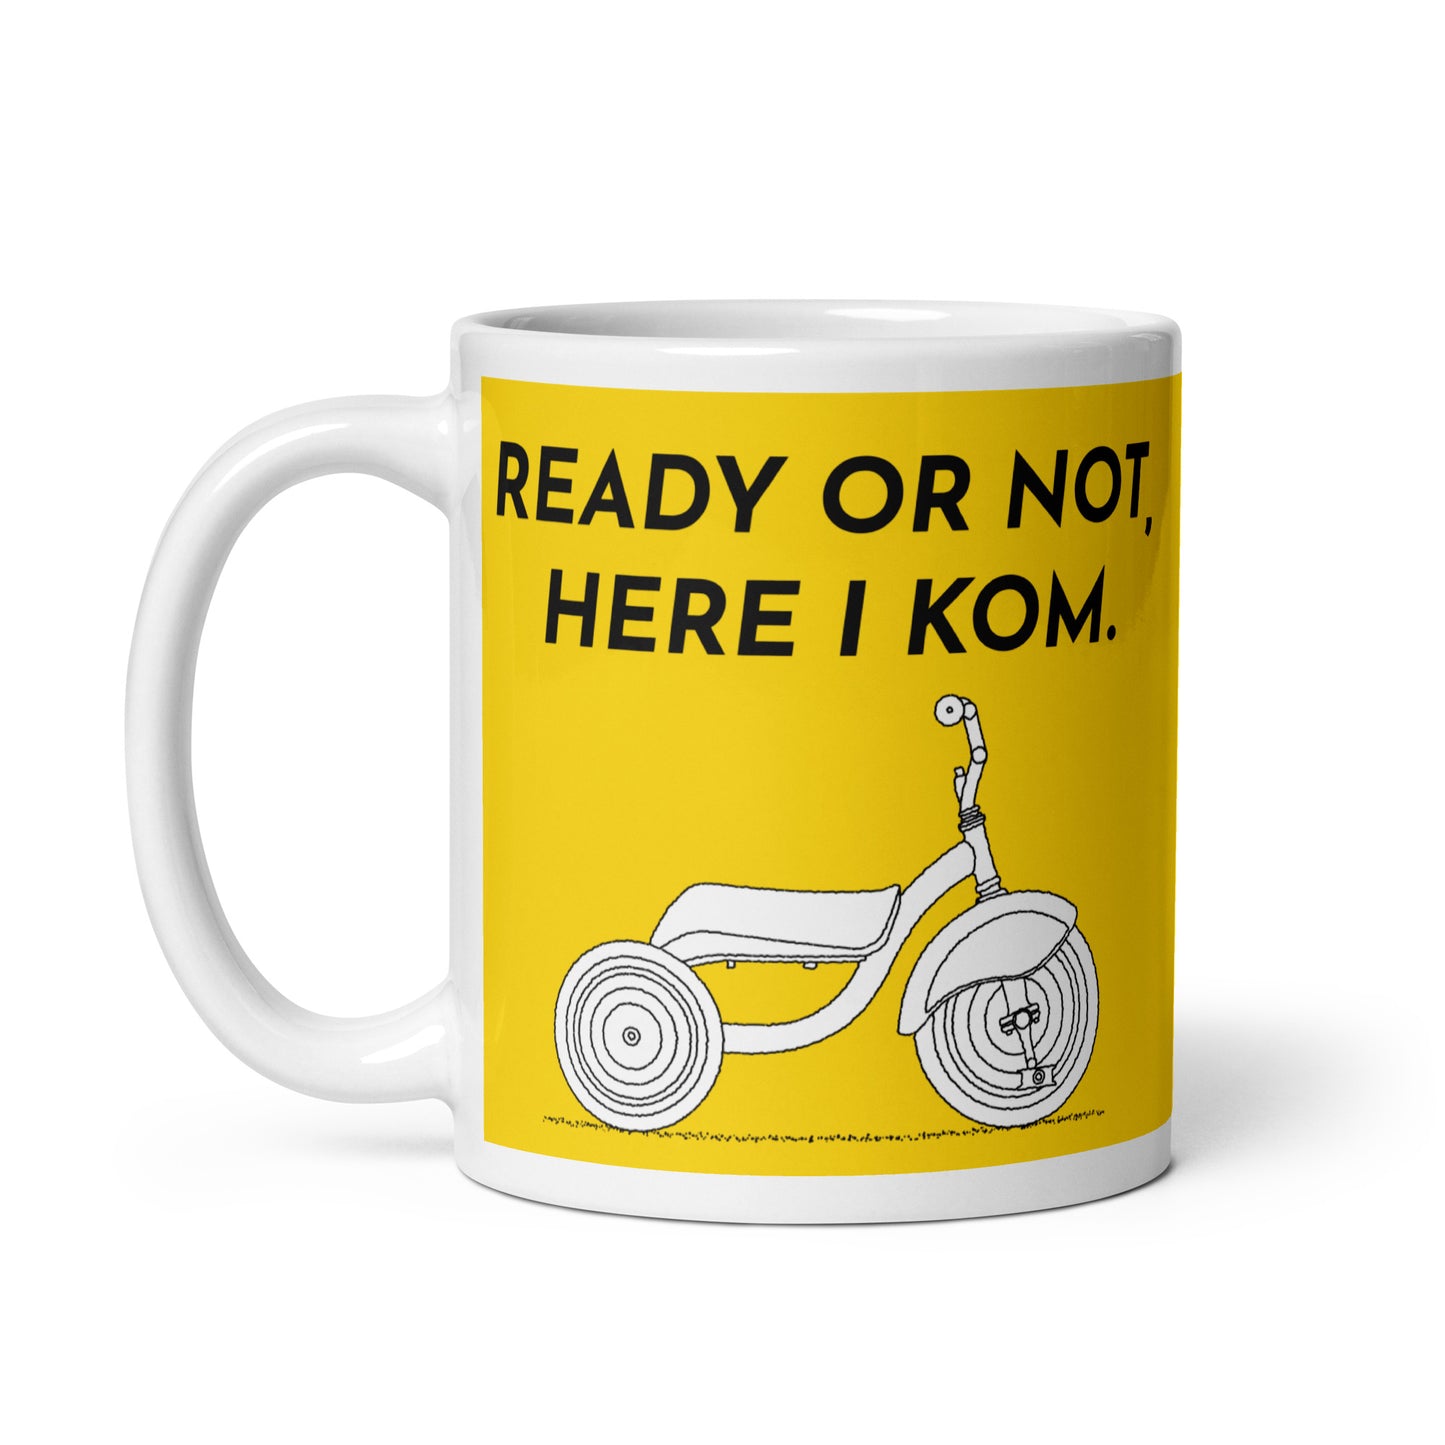 Ready Or Not, Here I KOM, Yellow Tricycle Mug M080